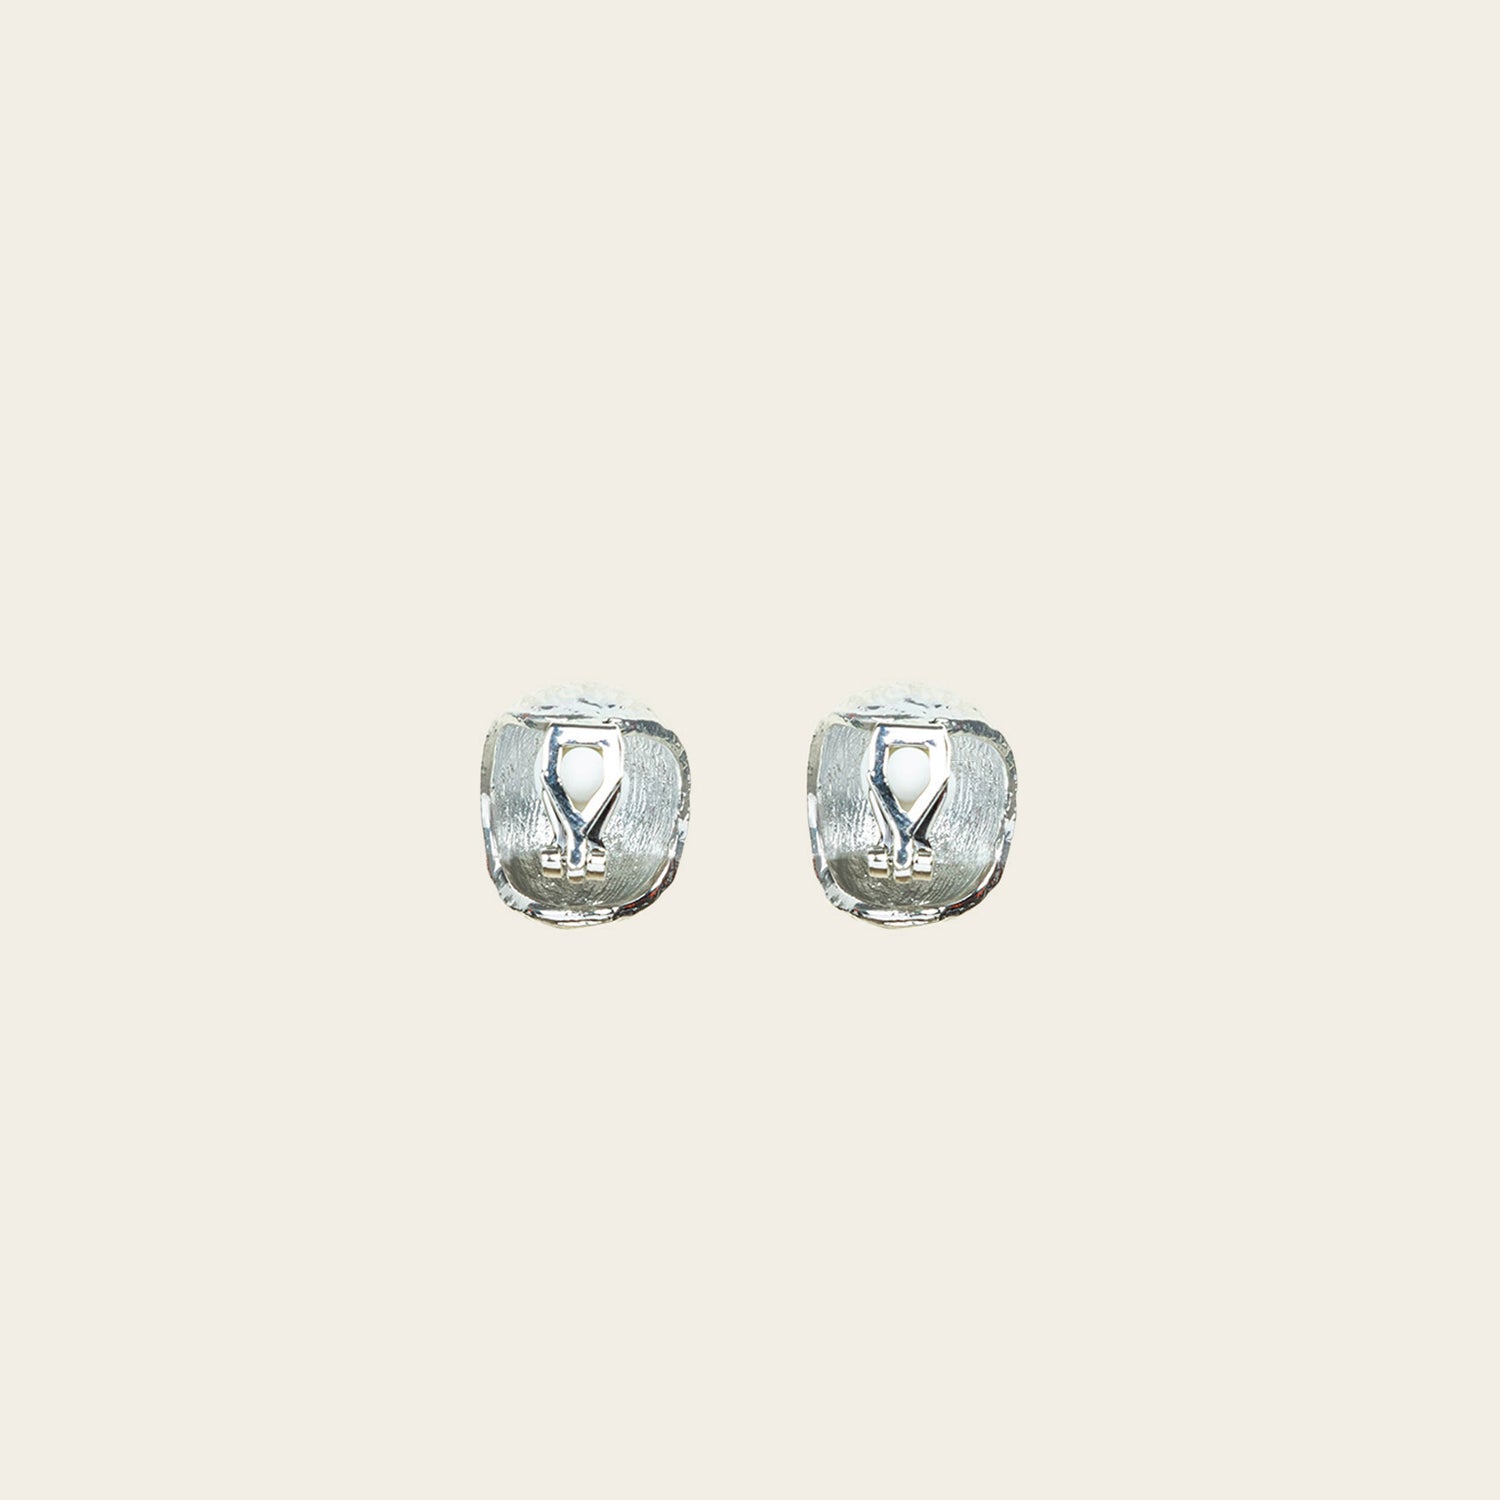 Image of the Alaia Clip On Earrings in Silver feature a padded clip-on closure, offering secure hold and ideal comfort for 8-12 hours of wear, for ear types of all shapes and sizes. Crafted from gold tone copper alloy, these earrings feature a single pair per item.